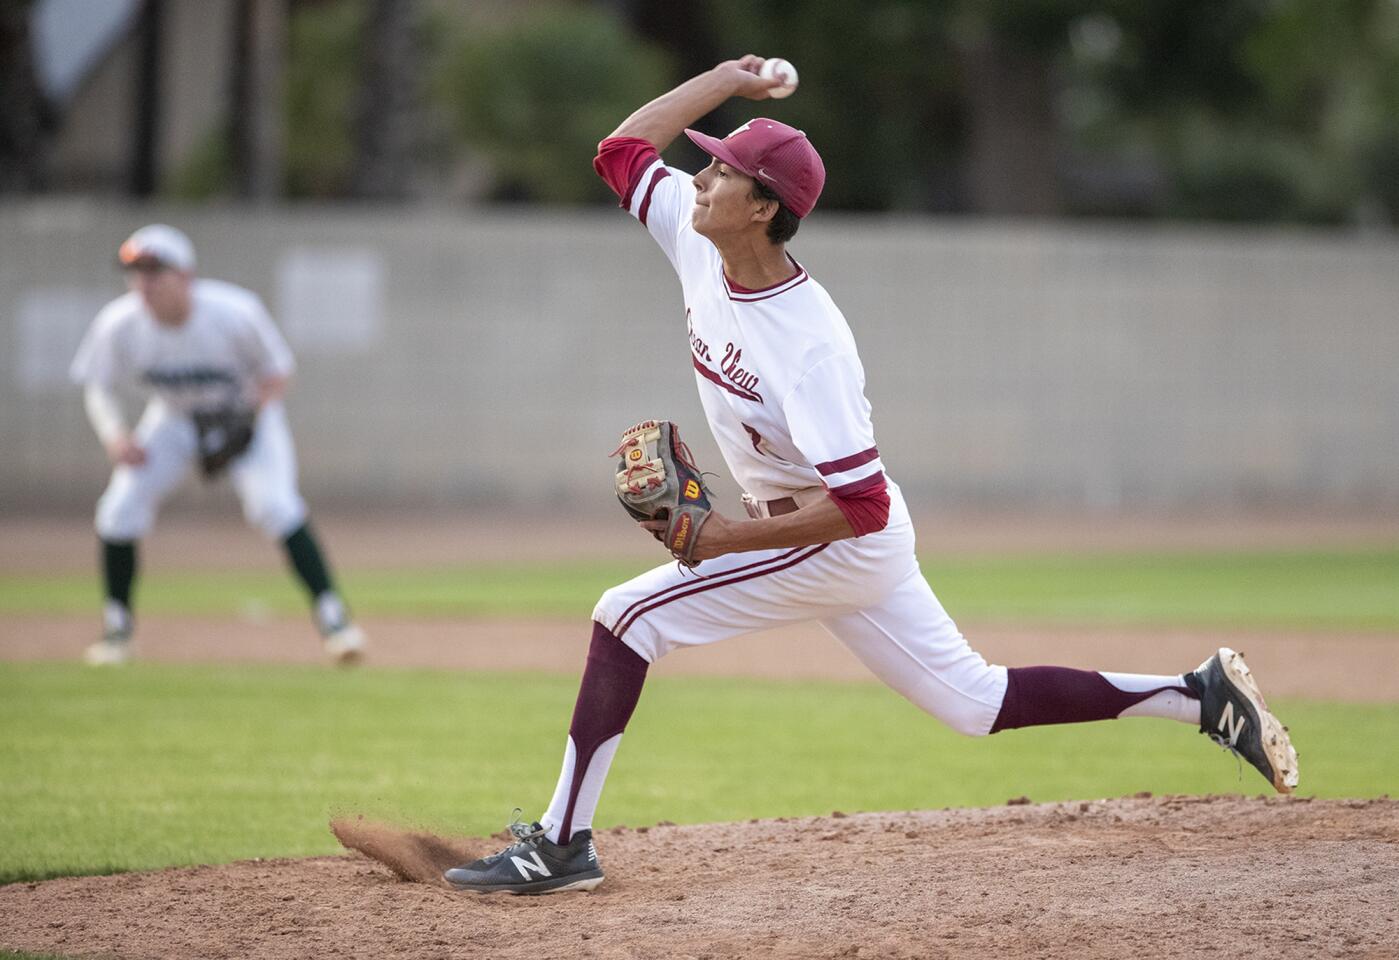 Ocean View's Gavin Kennedy pitches for the South in the fifth inning of the Kiwanis Club of Greater Anaheim's 52nd Orange County High School All-Star Baseball Game for seniors at La Palma Park's Dee Fee Field in Anaheim on Tuesday.